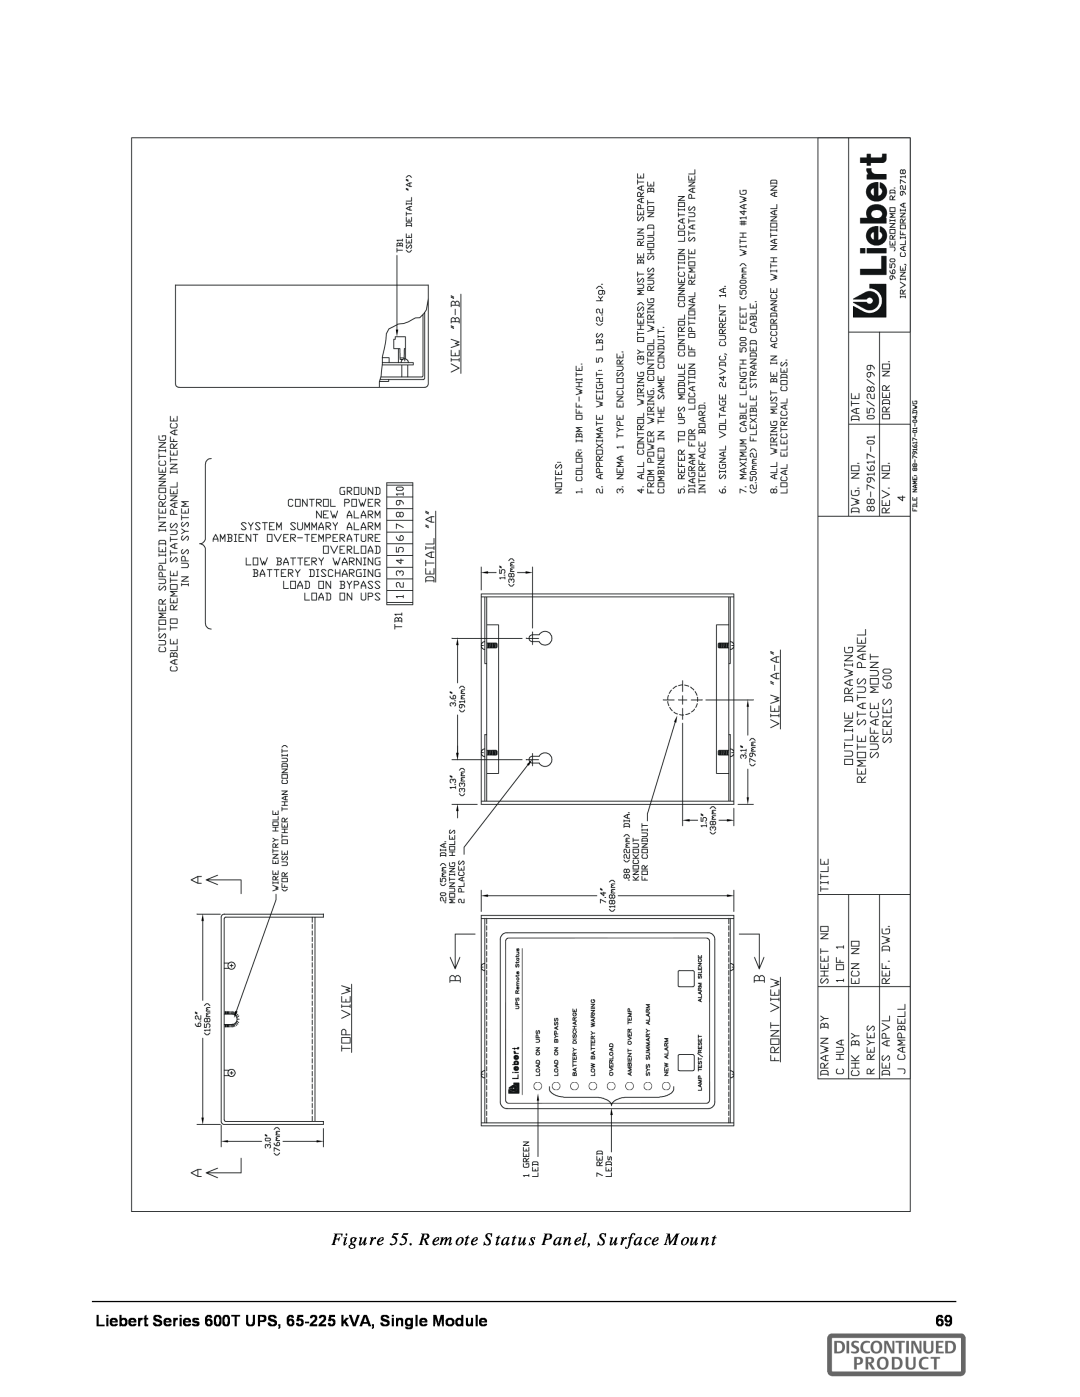 Emerson SERIES 600T manual Remote Status Panel, Surface Mount, Discontinued Product 